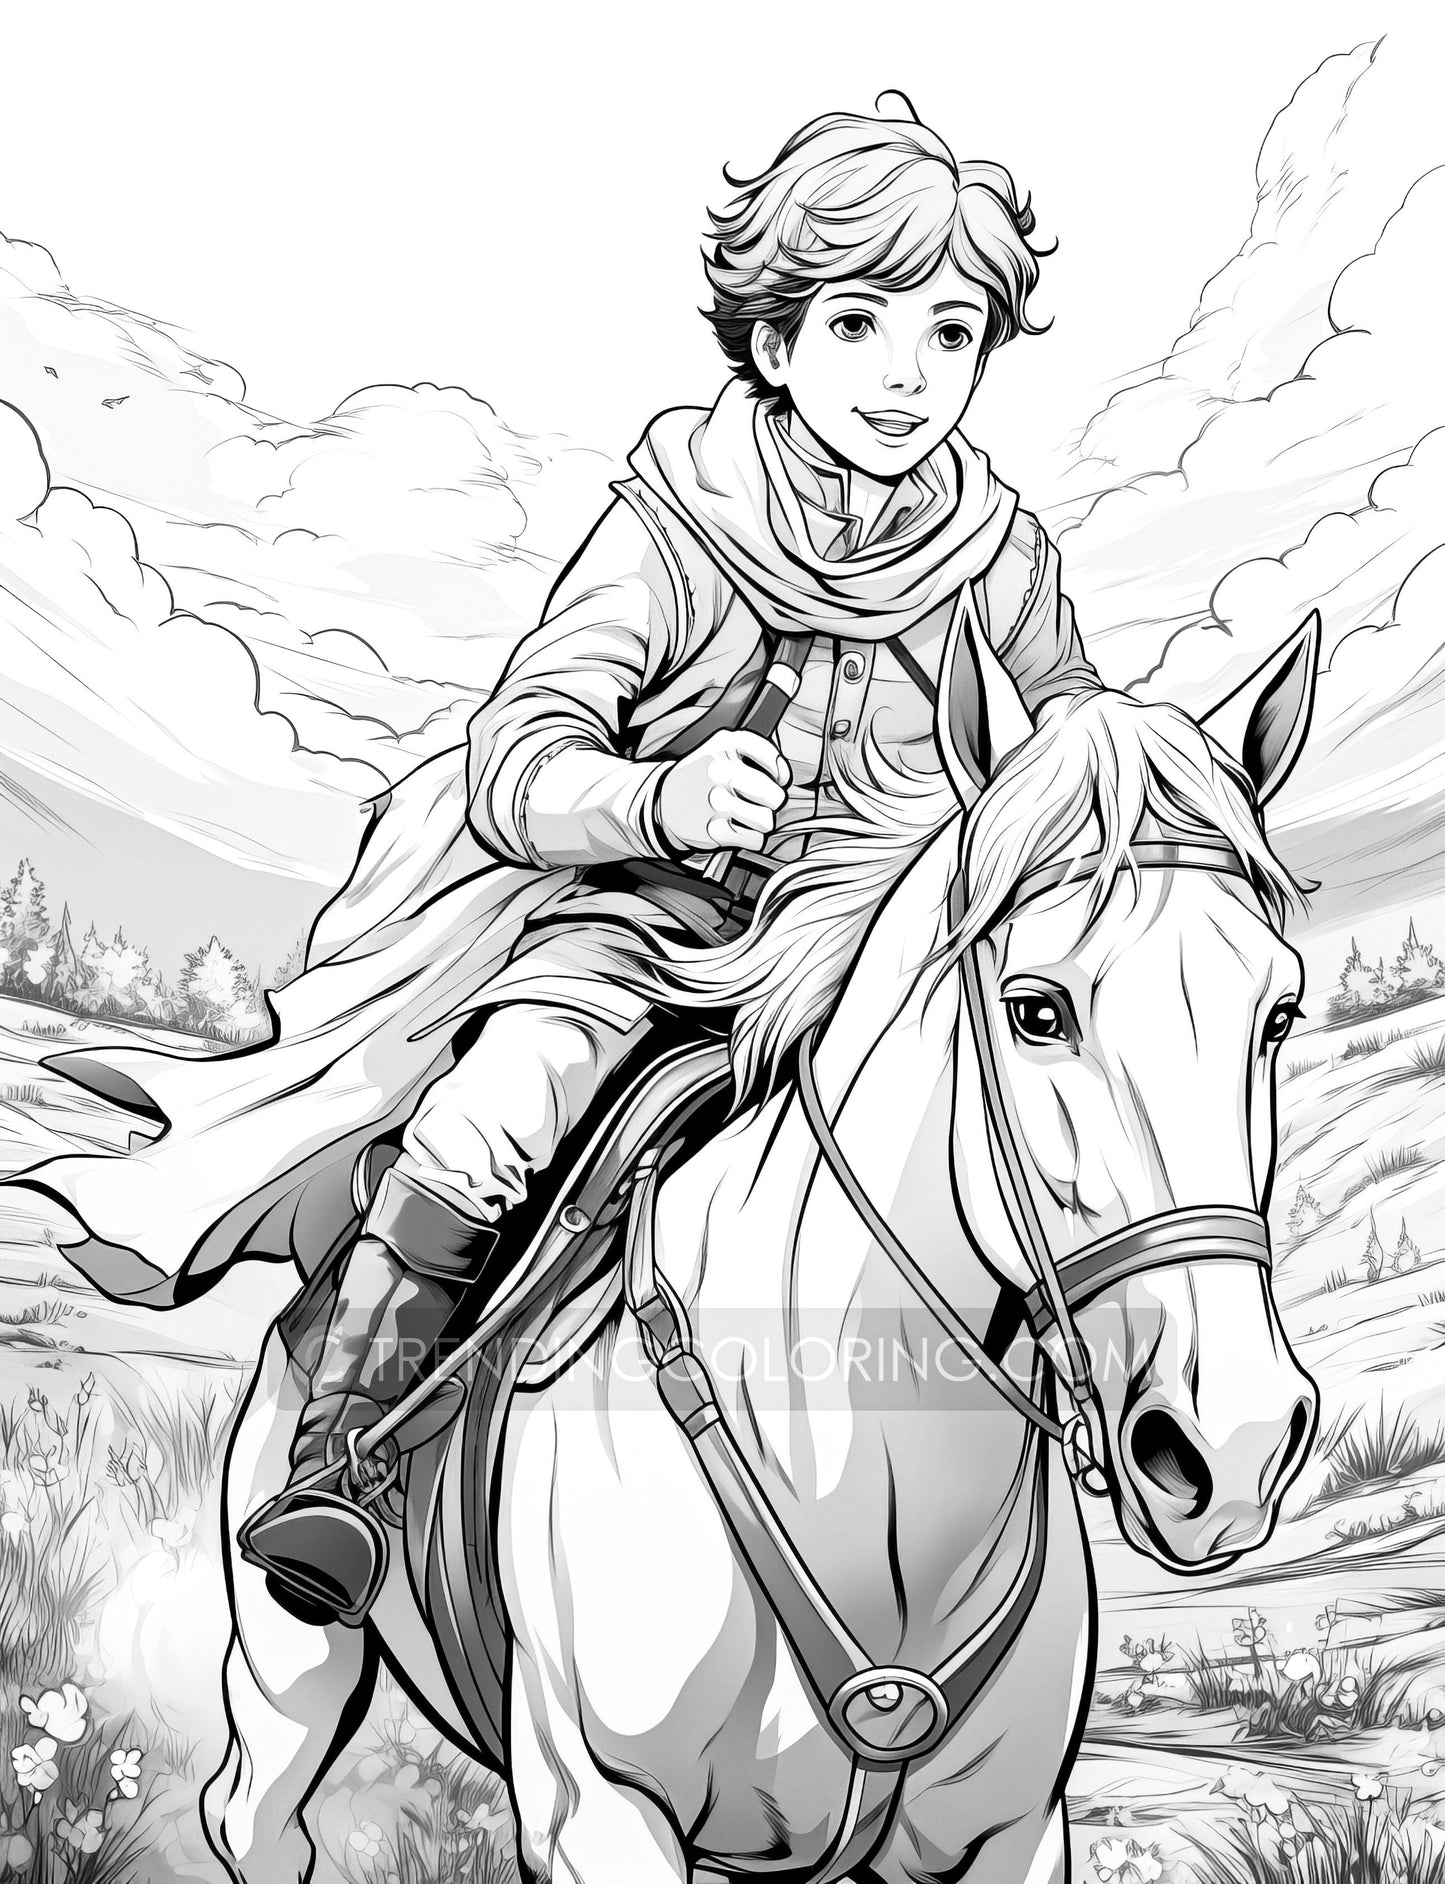 50 Little Prince's Adventure Grayscale Coloring Pages - Instant Download - Printable PDF Dark/Light